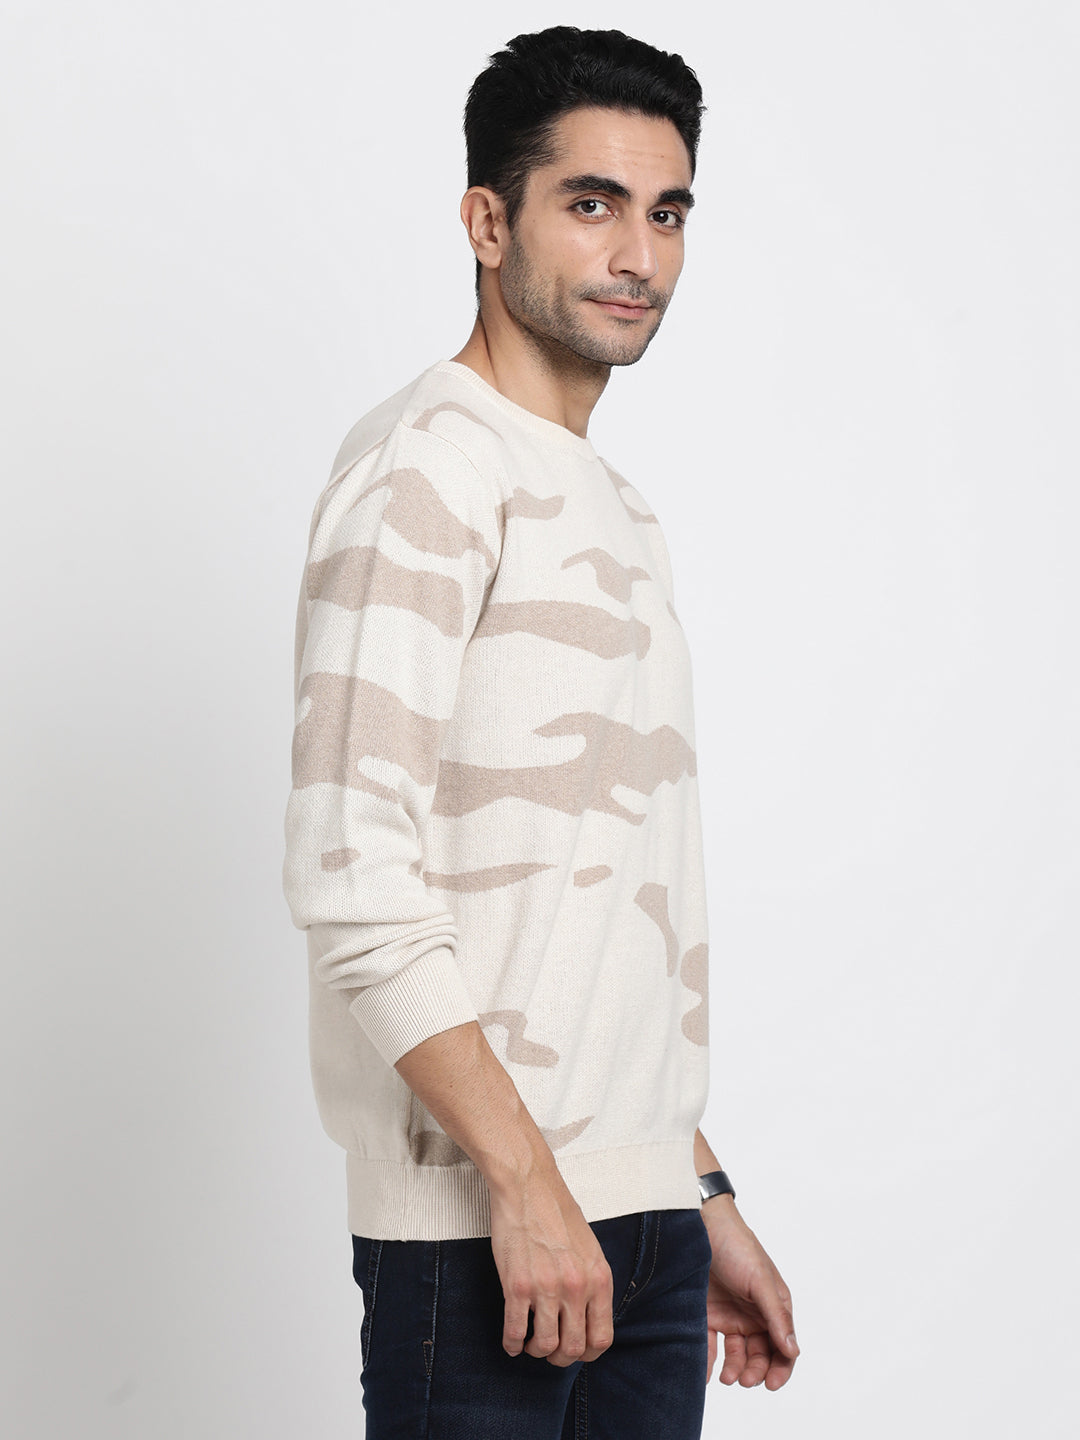 Knitted Beige Printed Regular Fit Full Sleeve Casual Pull Over